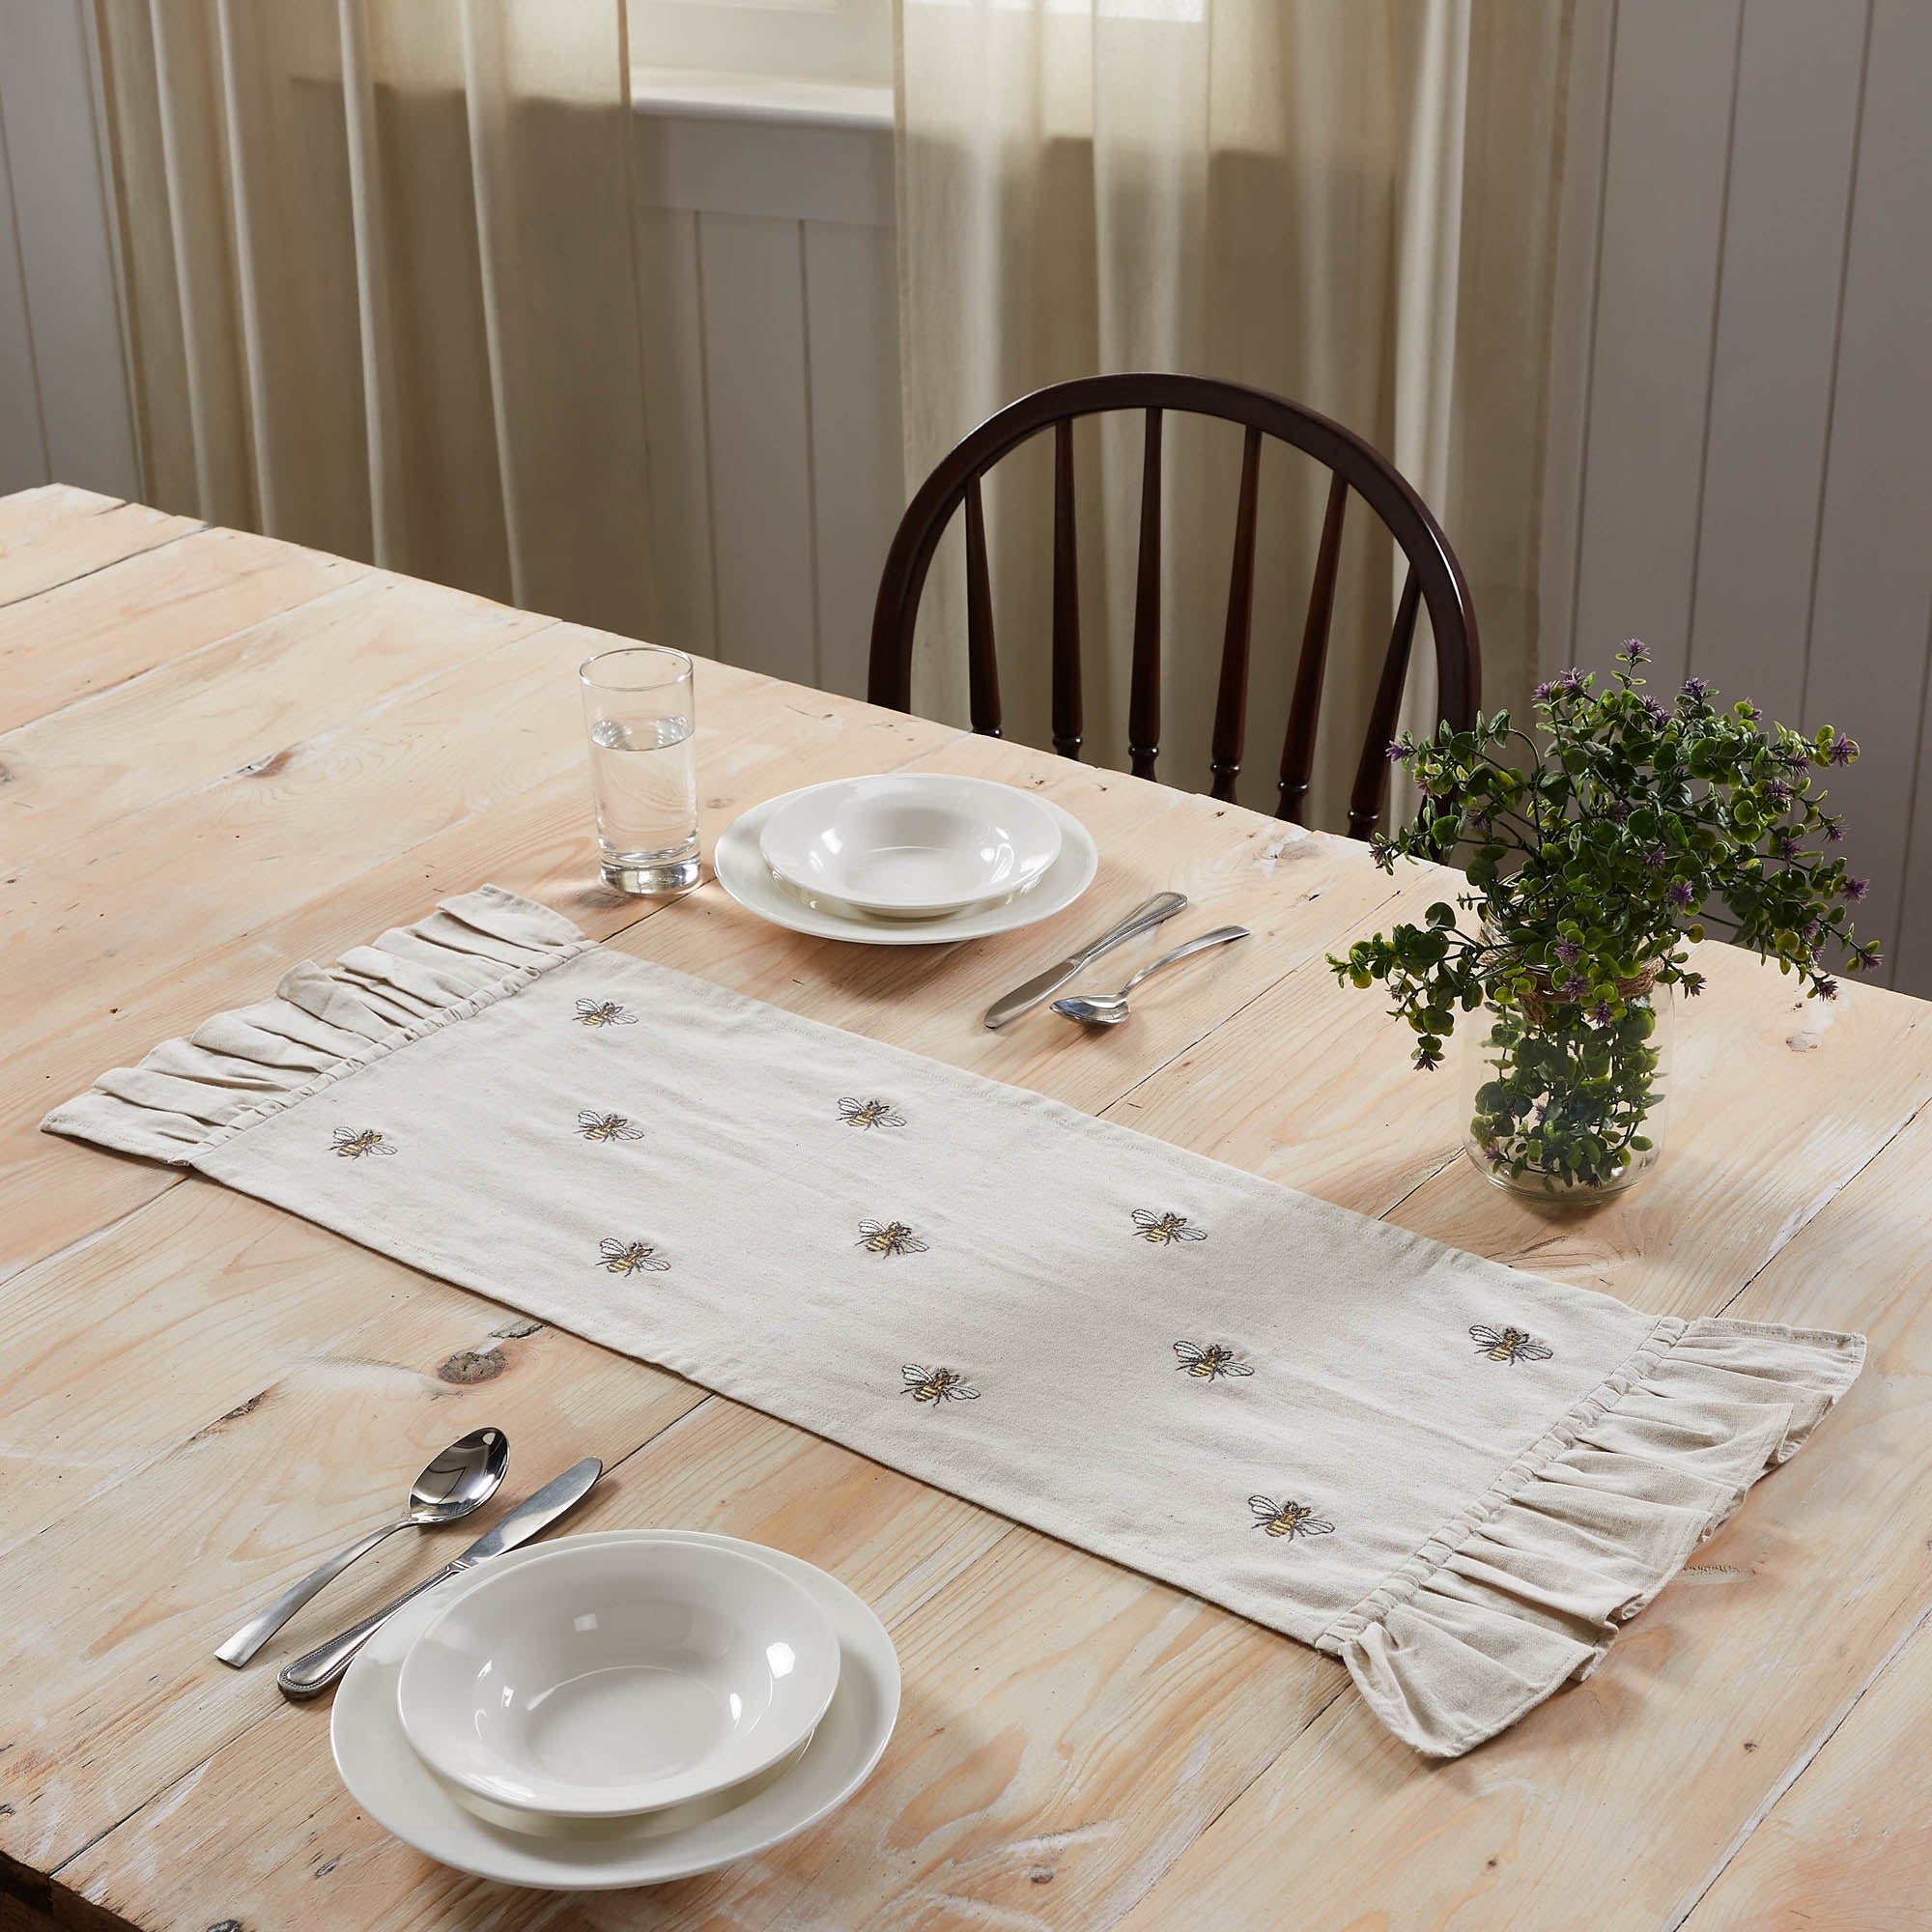 Embroidered Bee Table Runner 13x36 VHC Brands